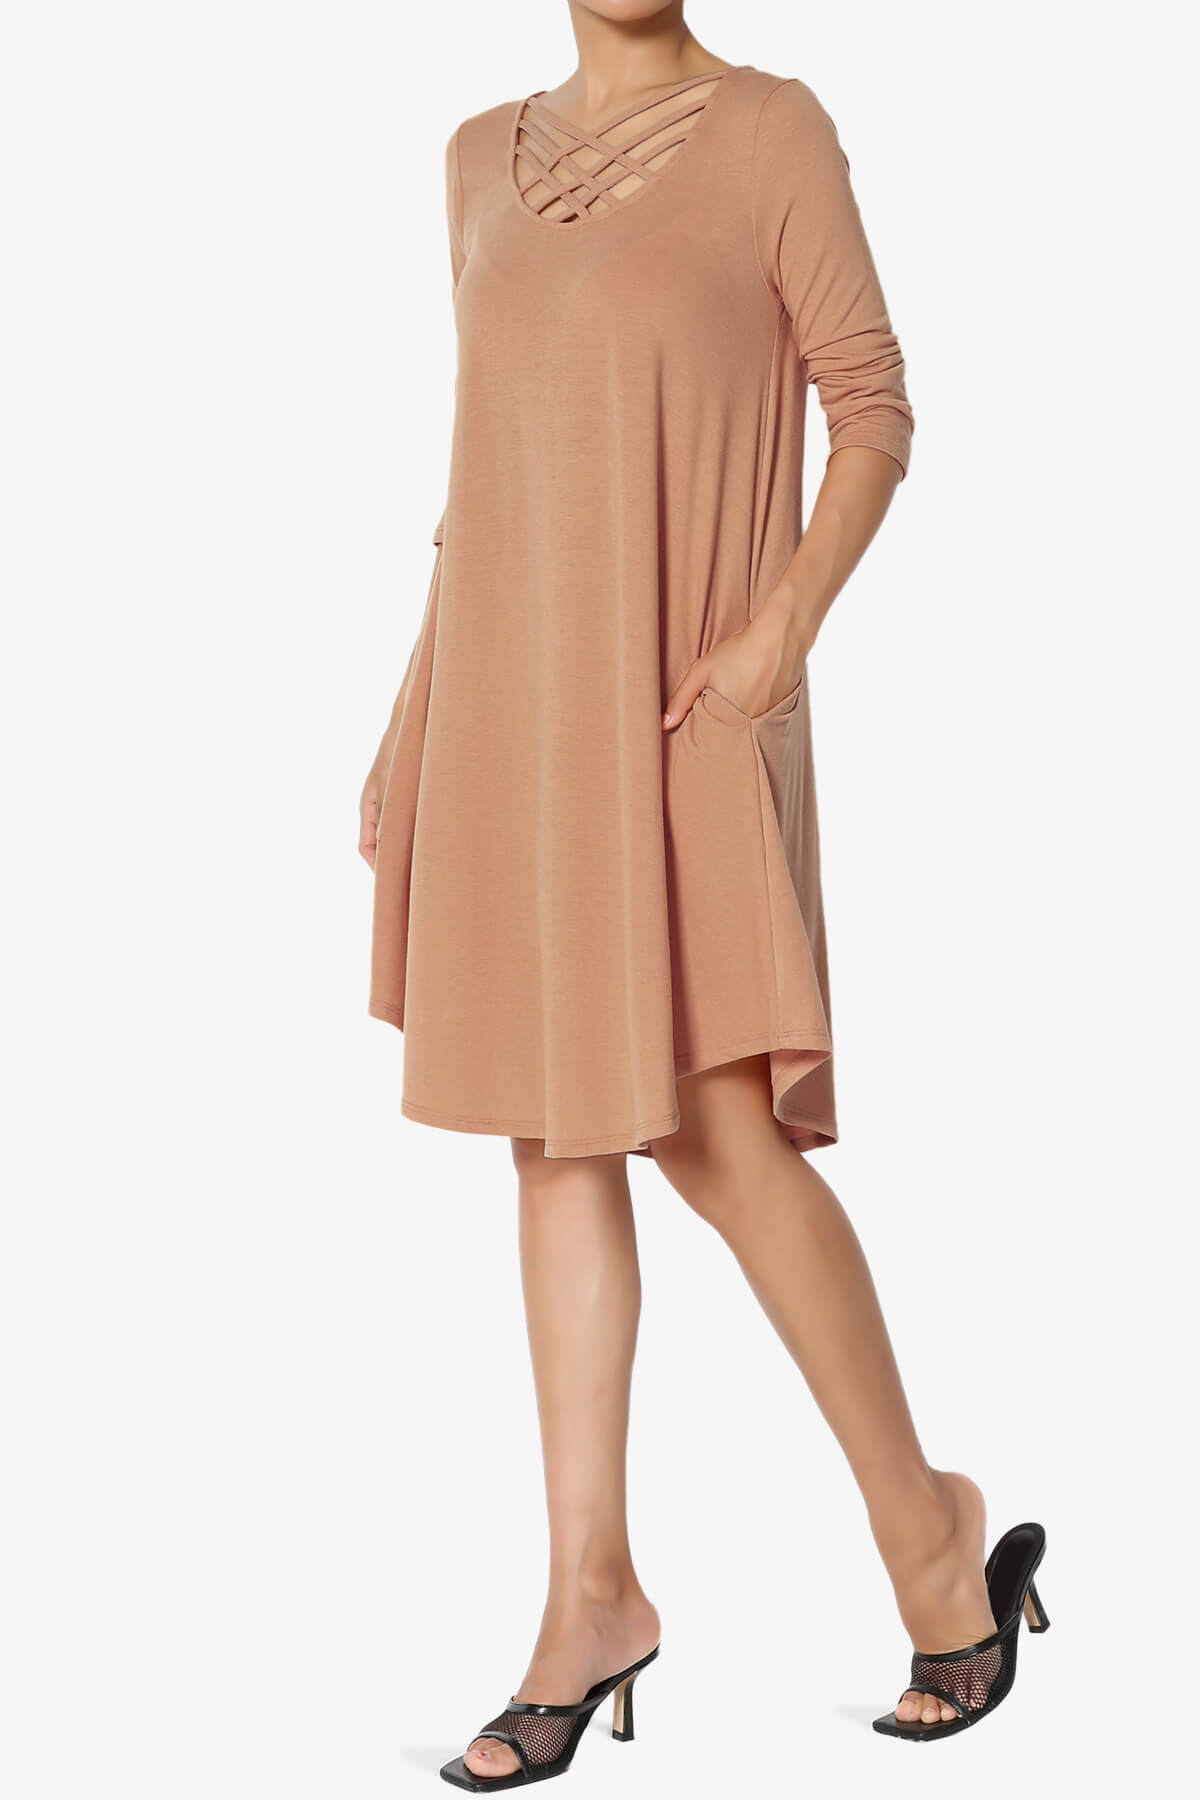 Ariella 3/4 Sleeve Strappy Scoop Neck Dress EGG SHELL_3